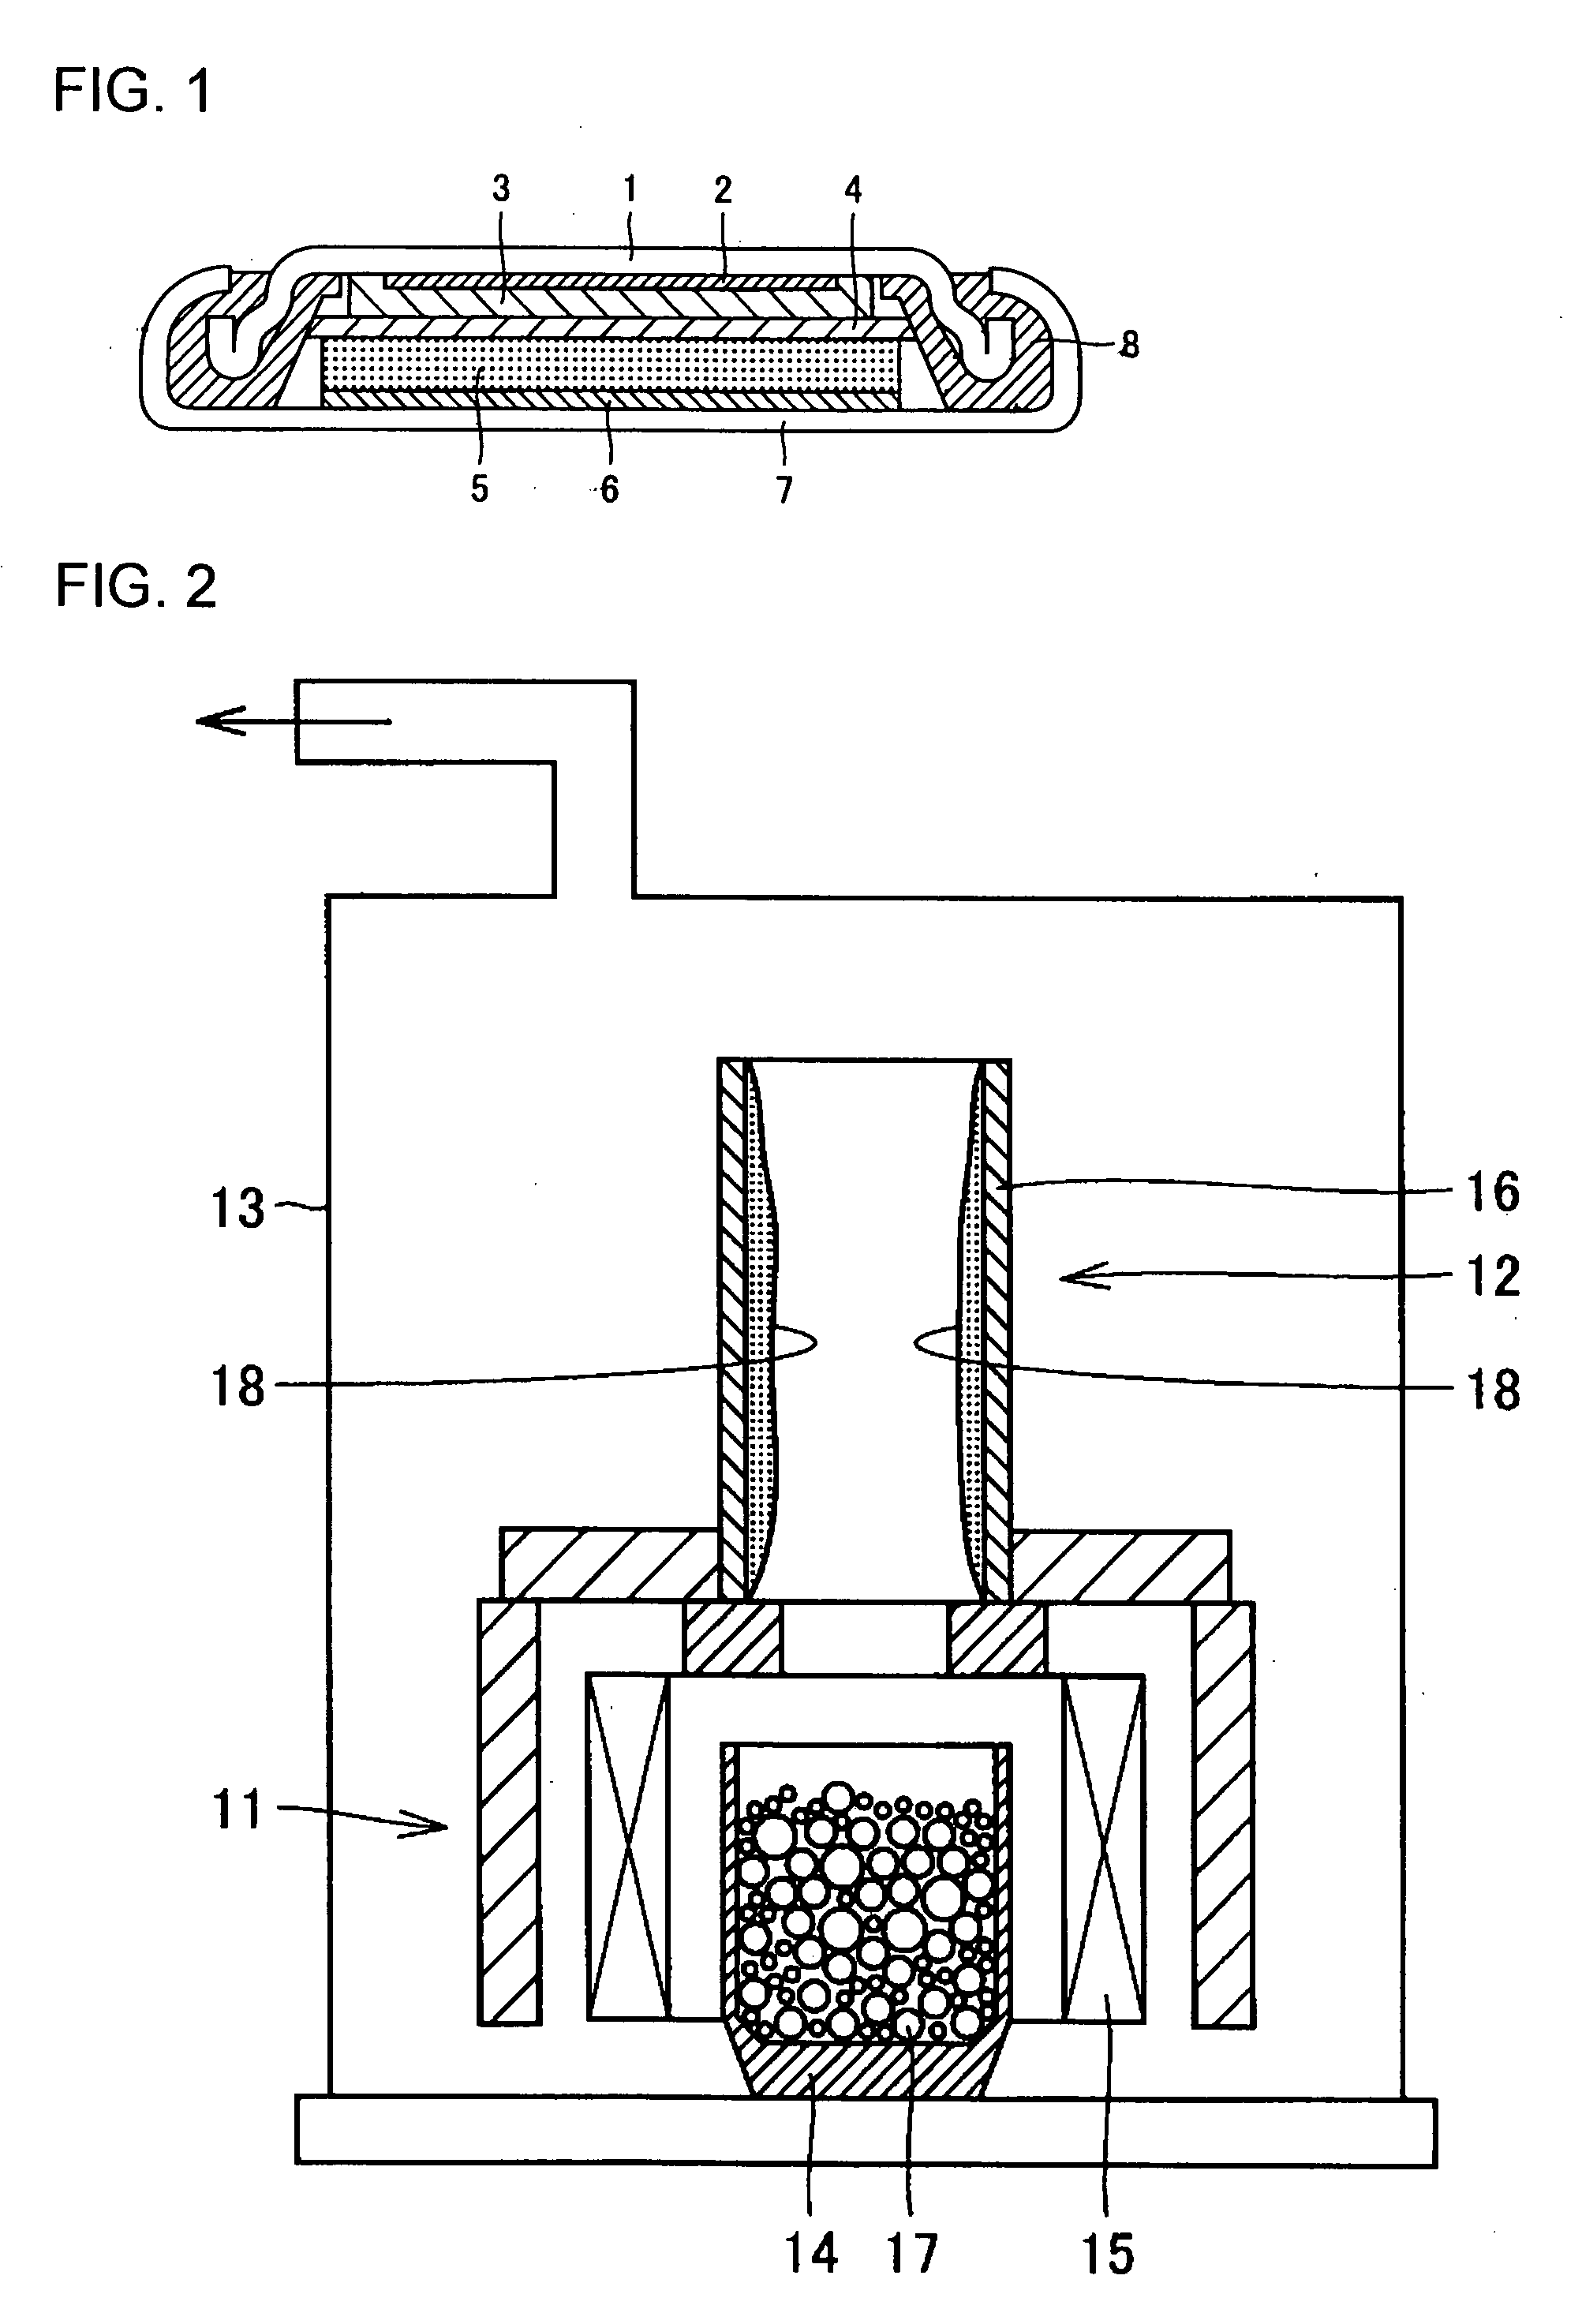 Silicon Monoxide Powder For Secondary Battery and Method For Producing the Same